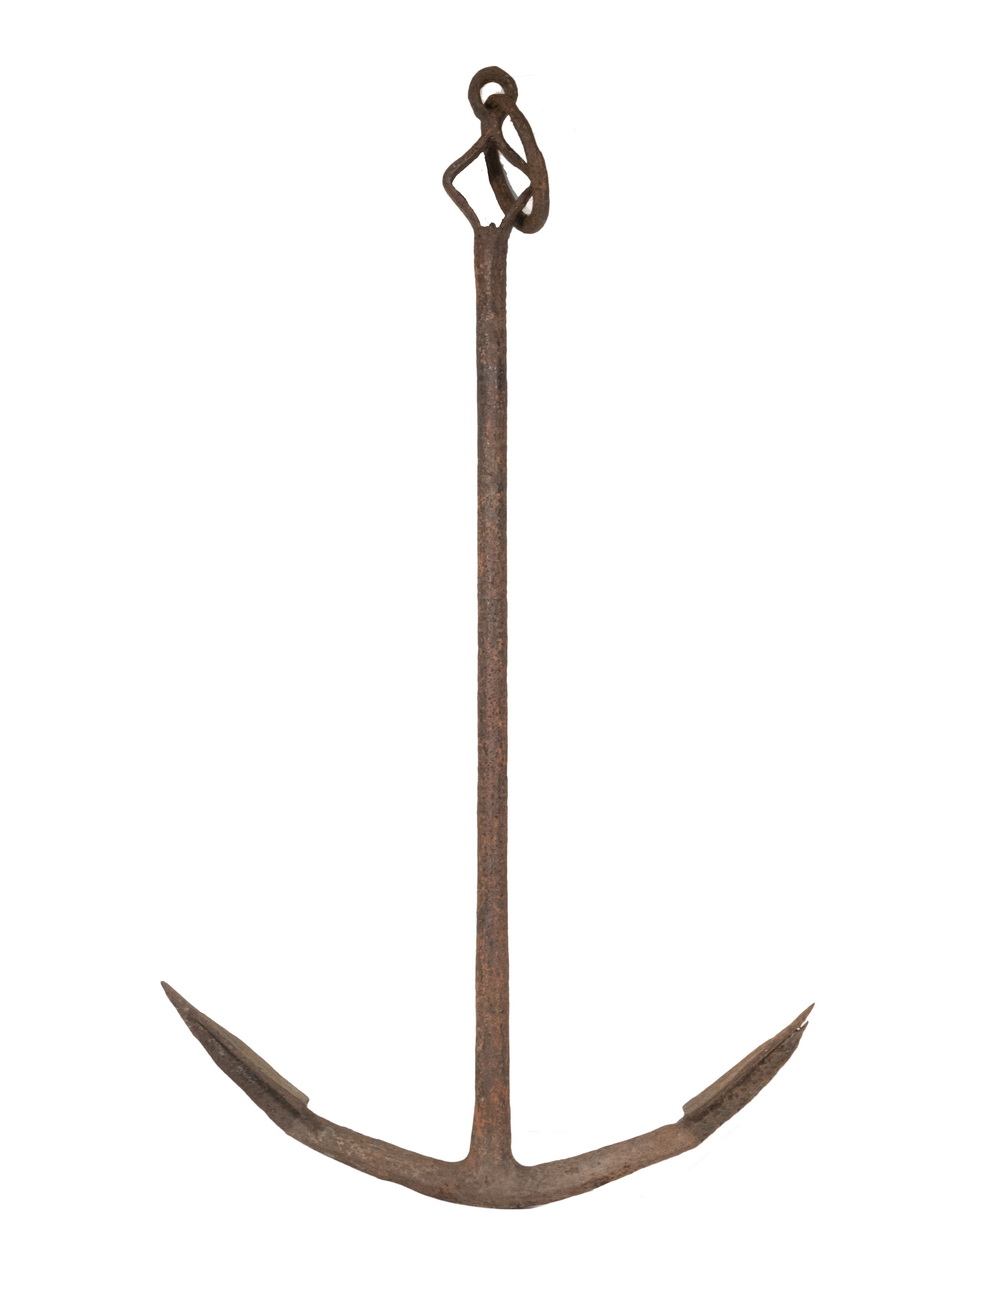 EARLY SHIP ANCHOR 18th or 19th c. Forged